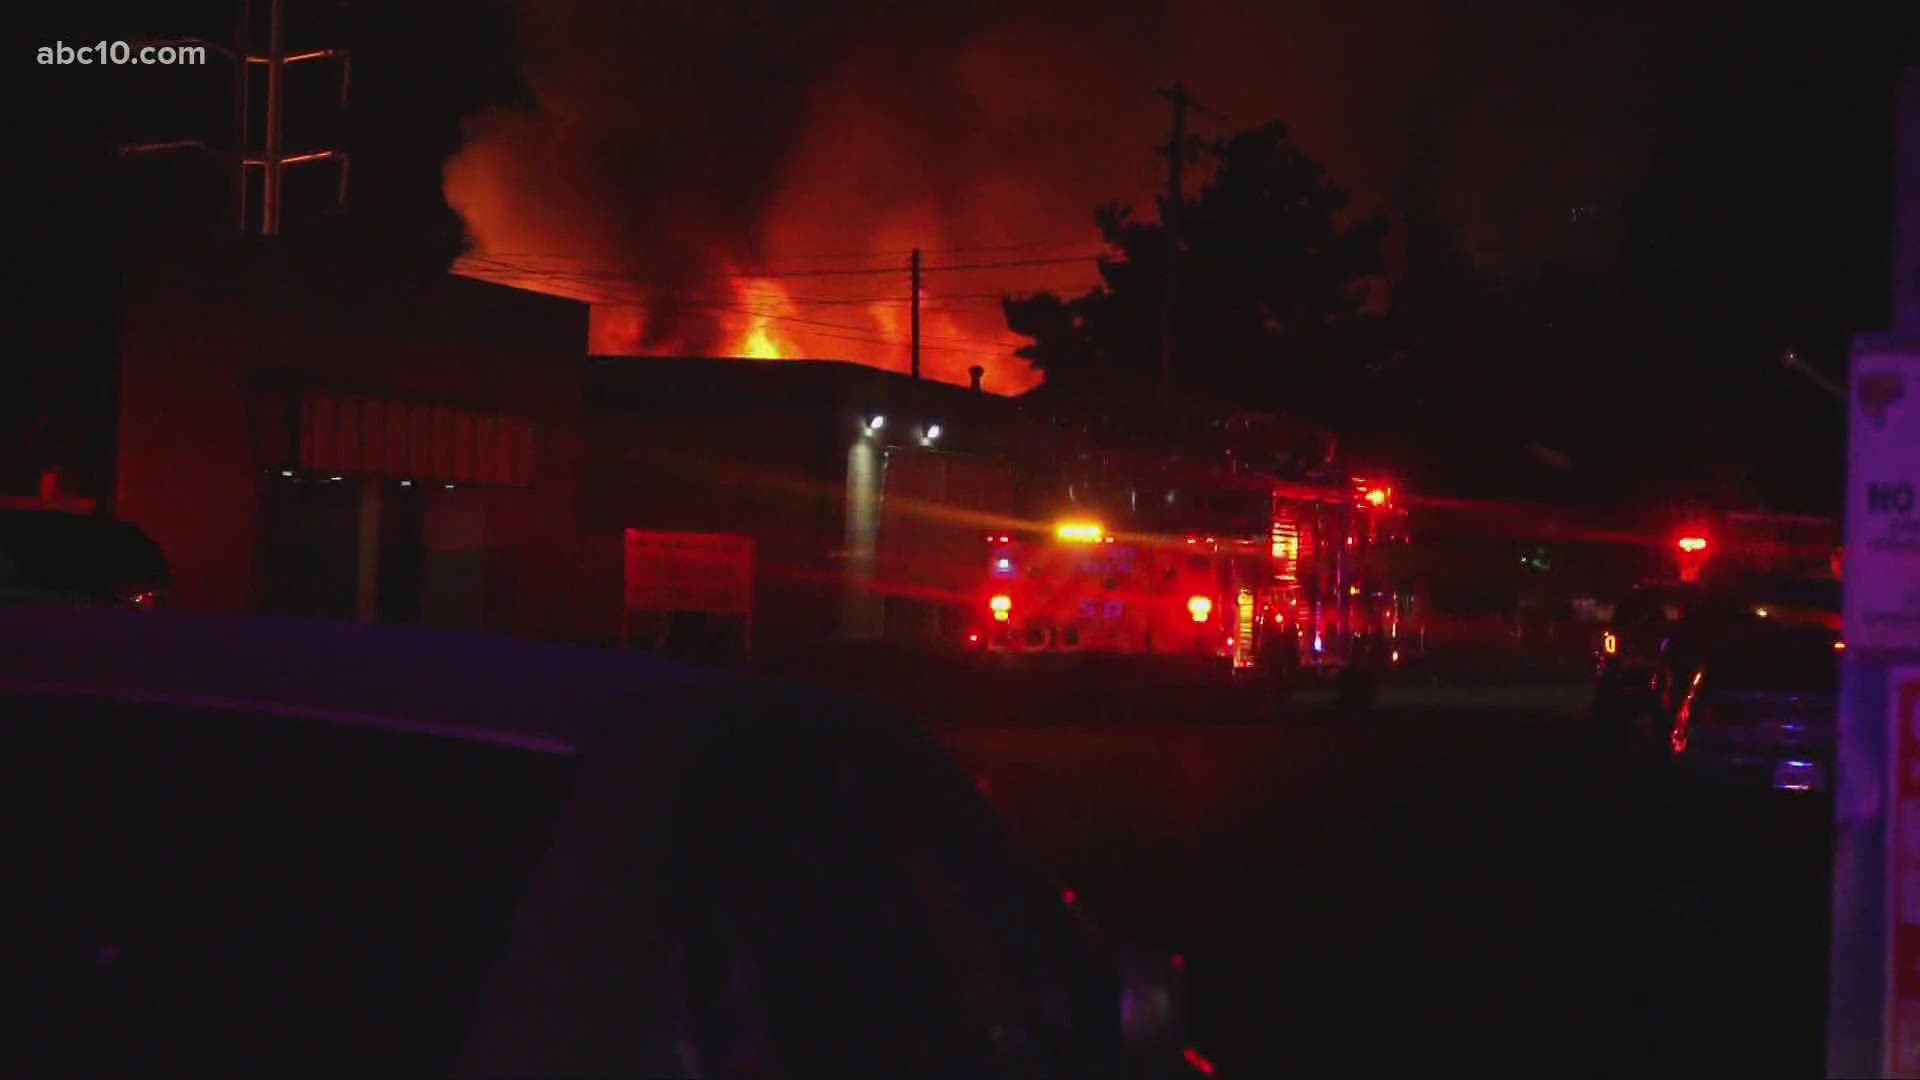 200 firefighters tried to contain a large commercial fire on 3400 block of La Grande Blvd.